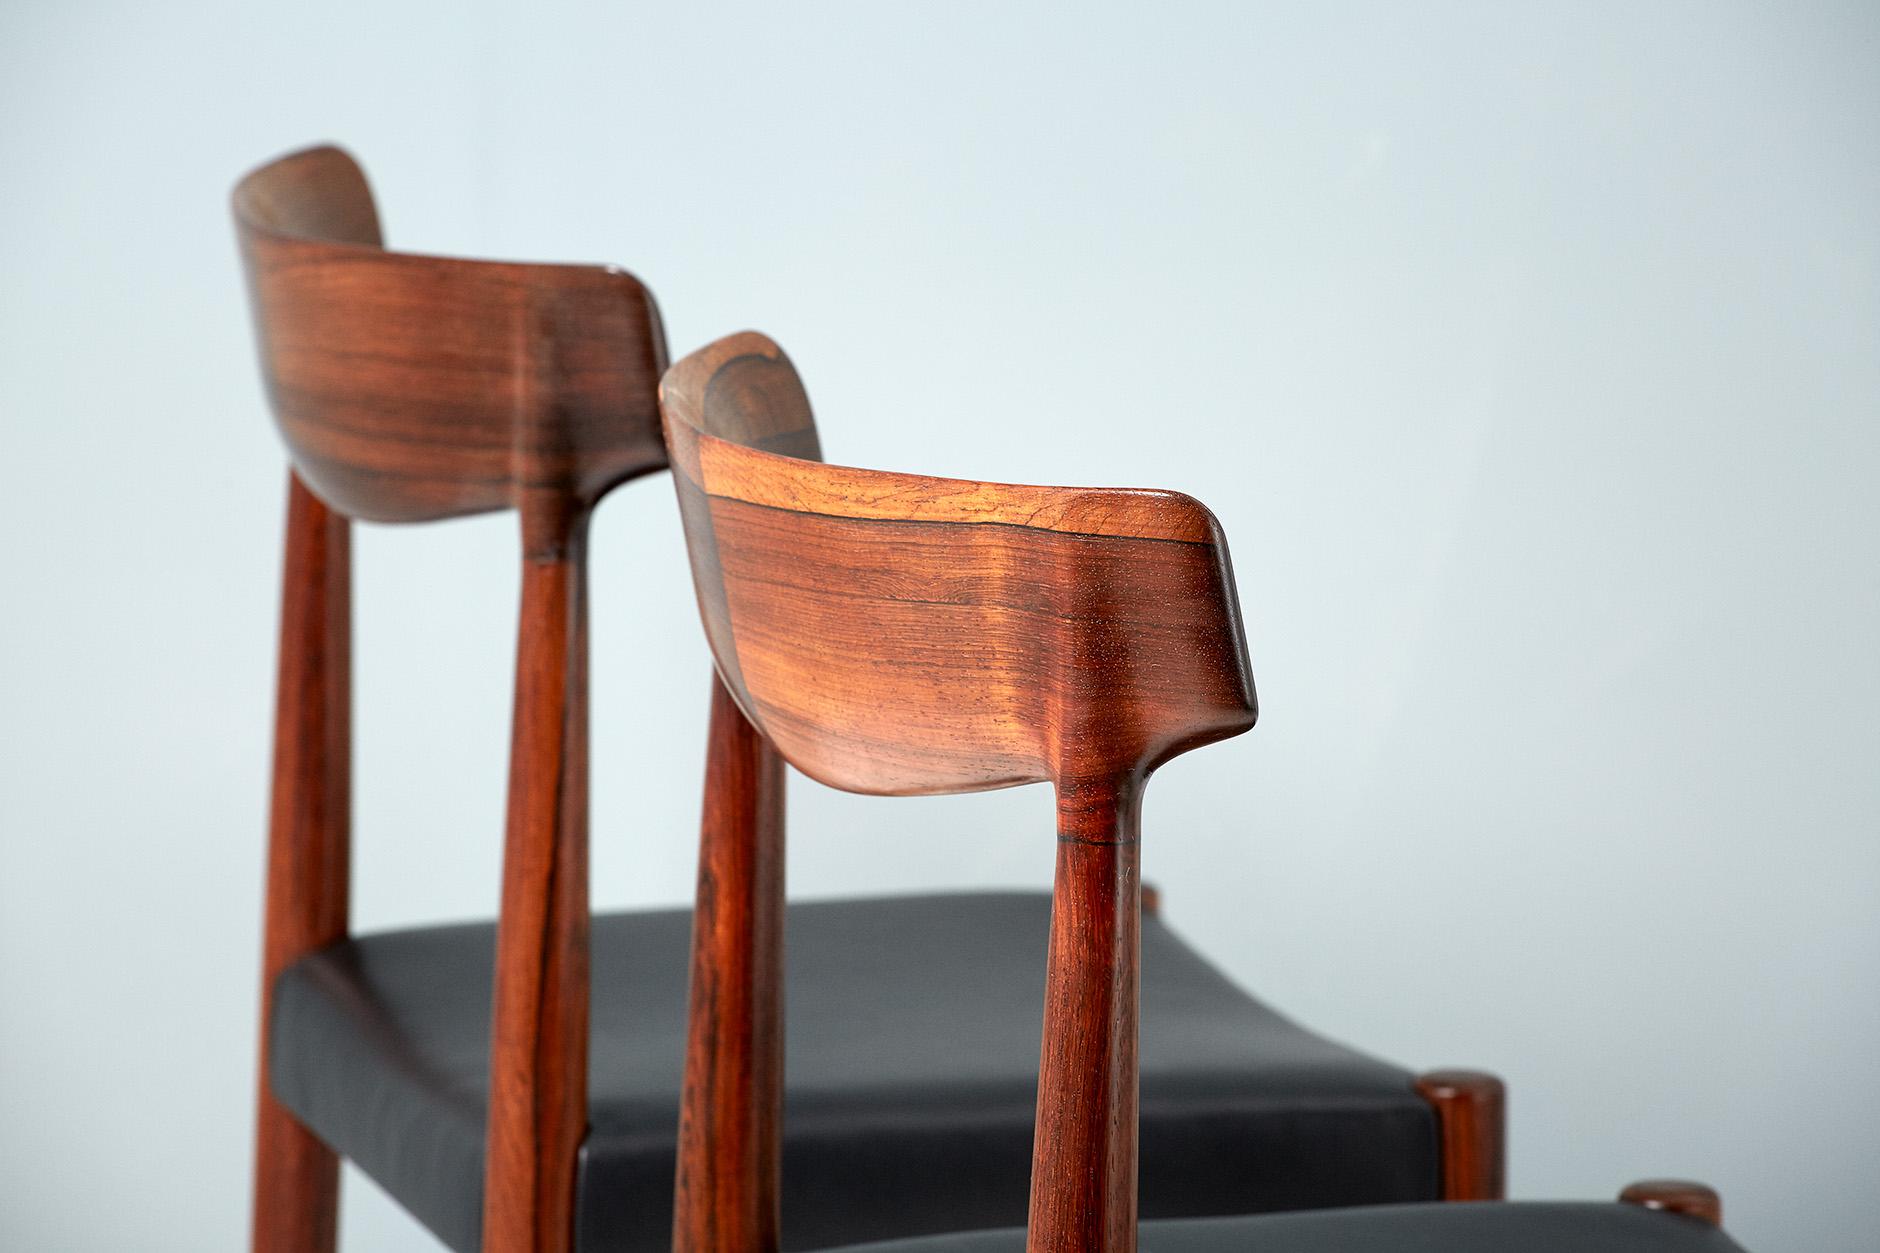 Danish Knud Faerch Set of 8 Model 343 Dining Chairs, Rosewood and Leather